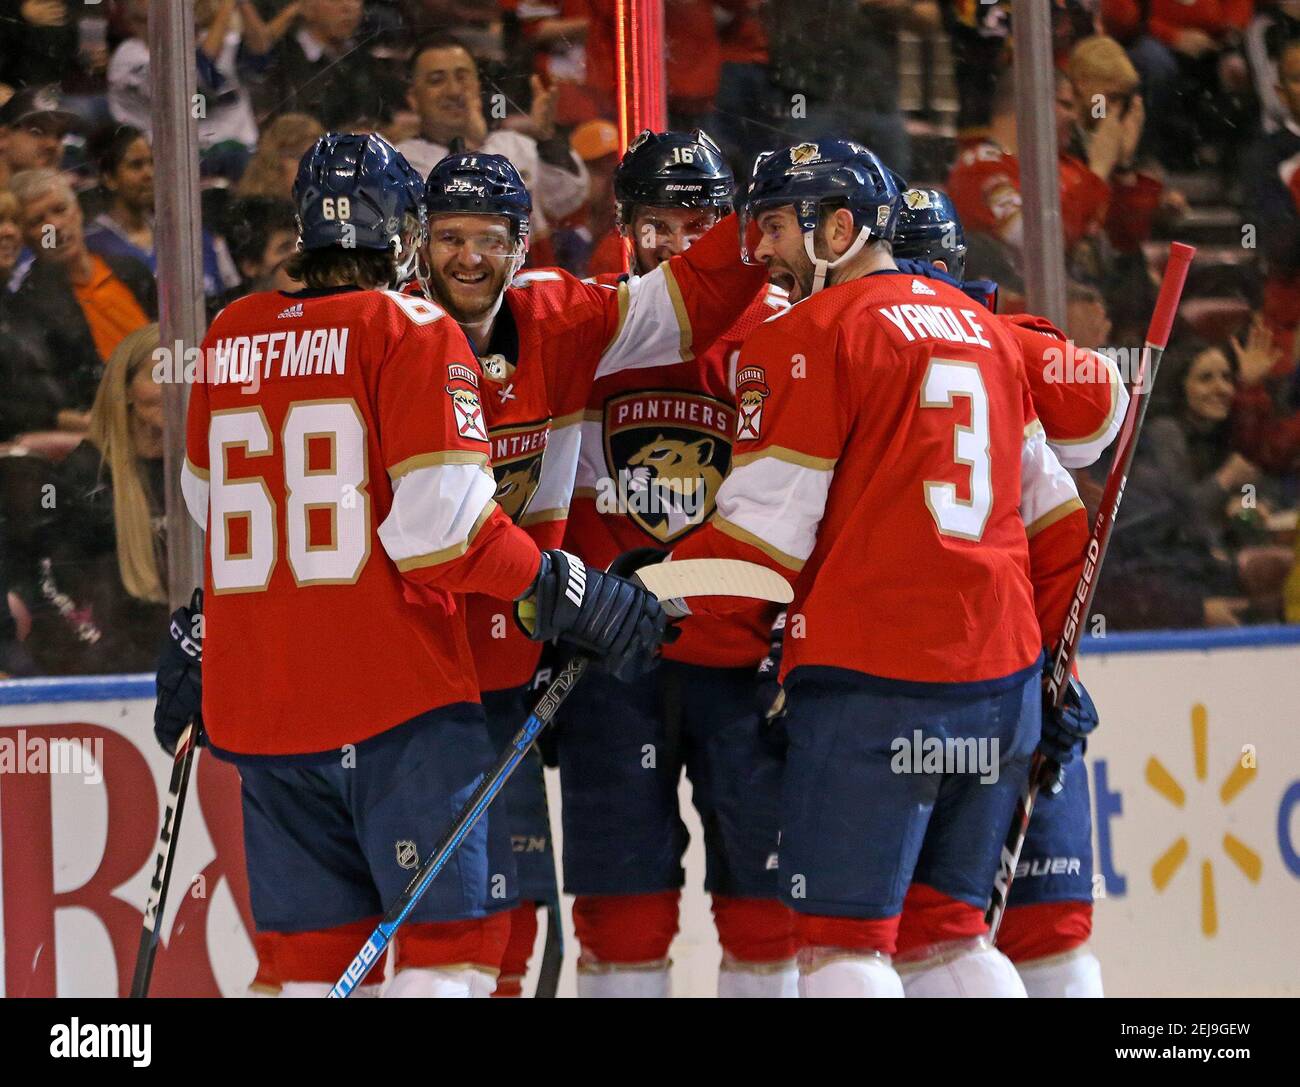 The Florida Panthers' Mike Hoffman (68) is congratulated by teammates after scoring during the second periodÂ against the Vancouver Canucks at the BB&T Center in Sunrise, Fla., on Thursday, Jan. 9, 2020. The Panthers won, 5-2. (David Santiago/Miami Herald/TNS) Stock Photo